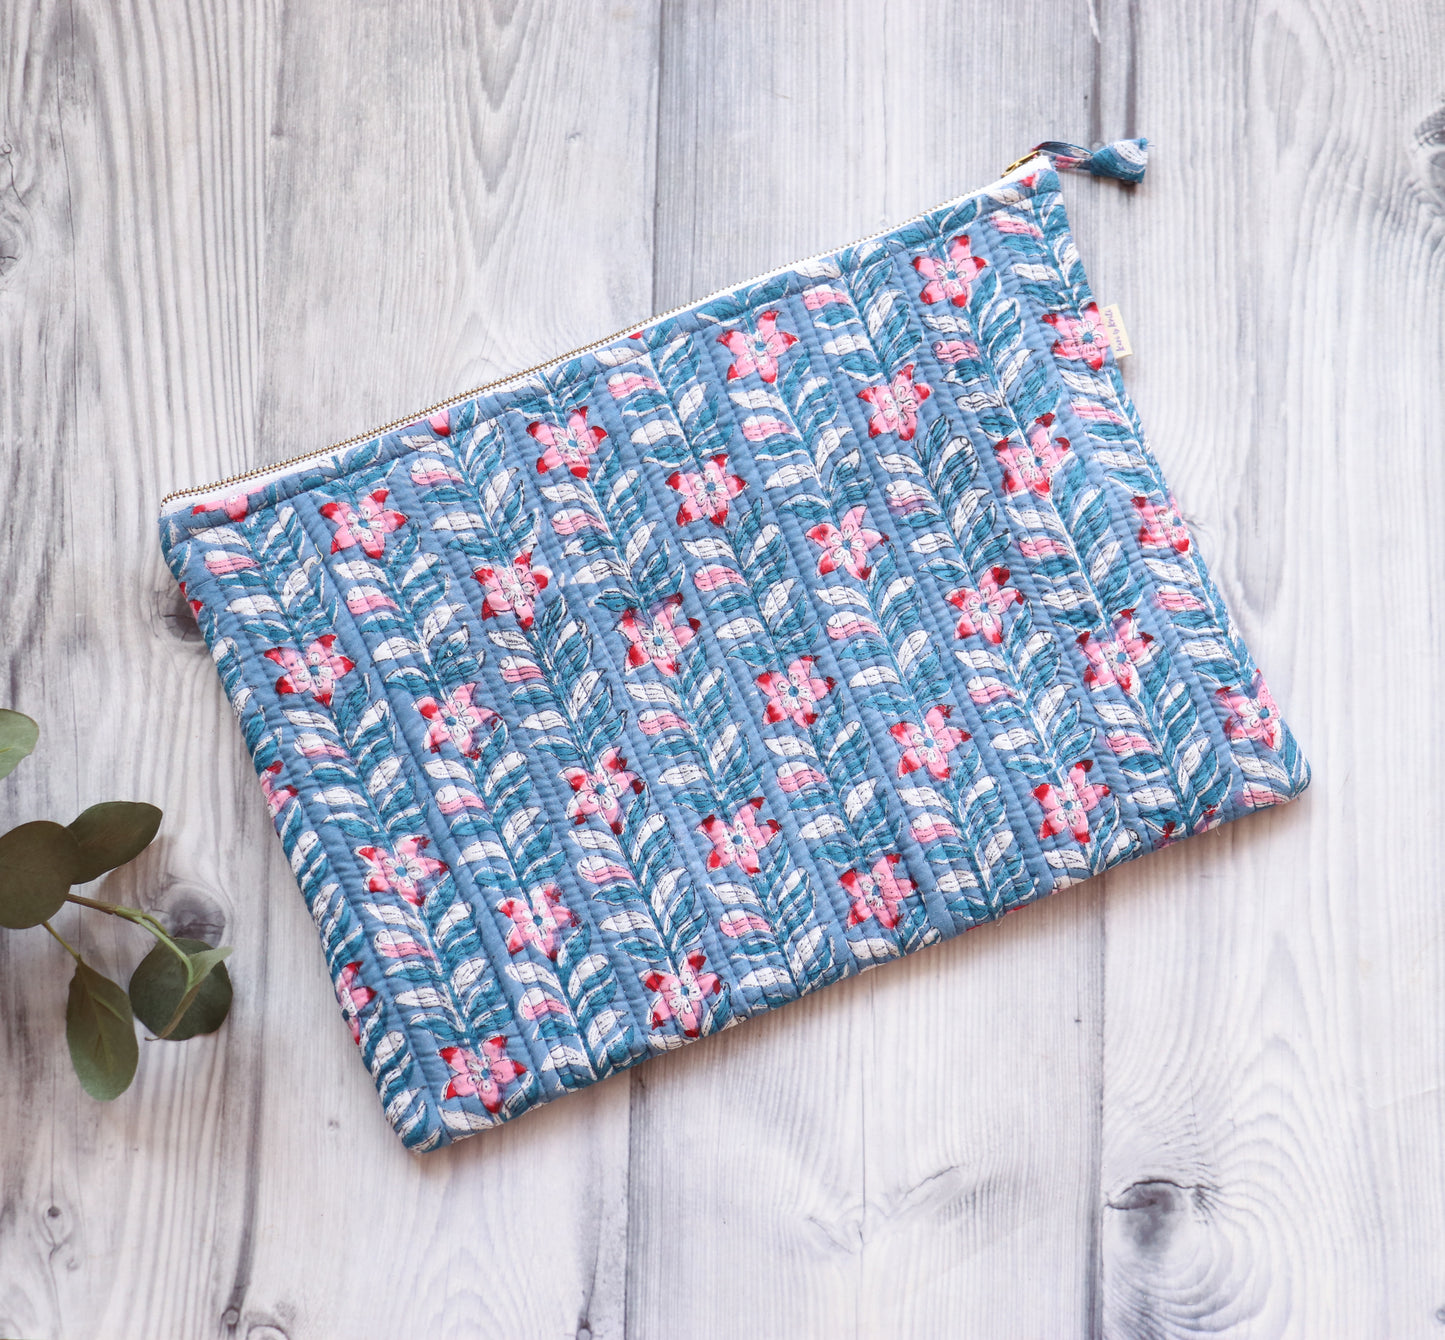 Block print Laptop sleeves - Laptop cover - Blue floral - 13 inch, 14 inch & 15 inch